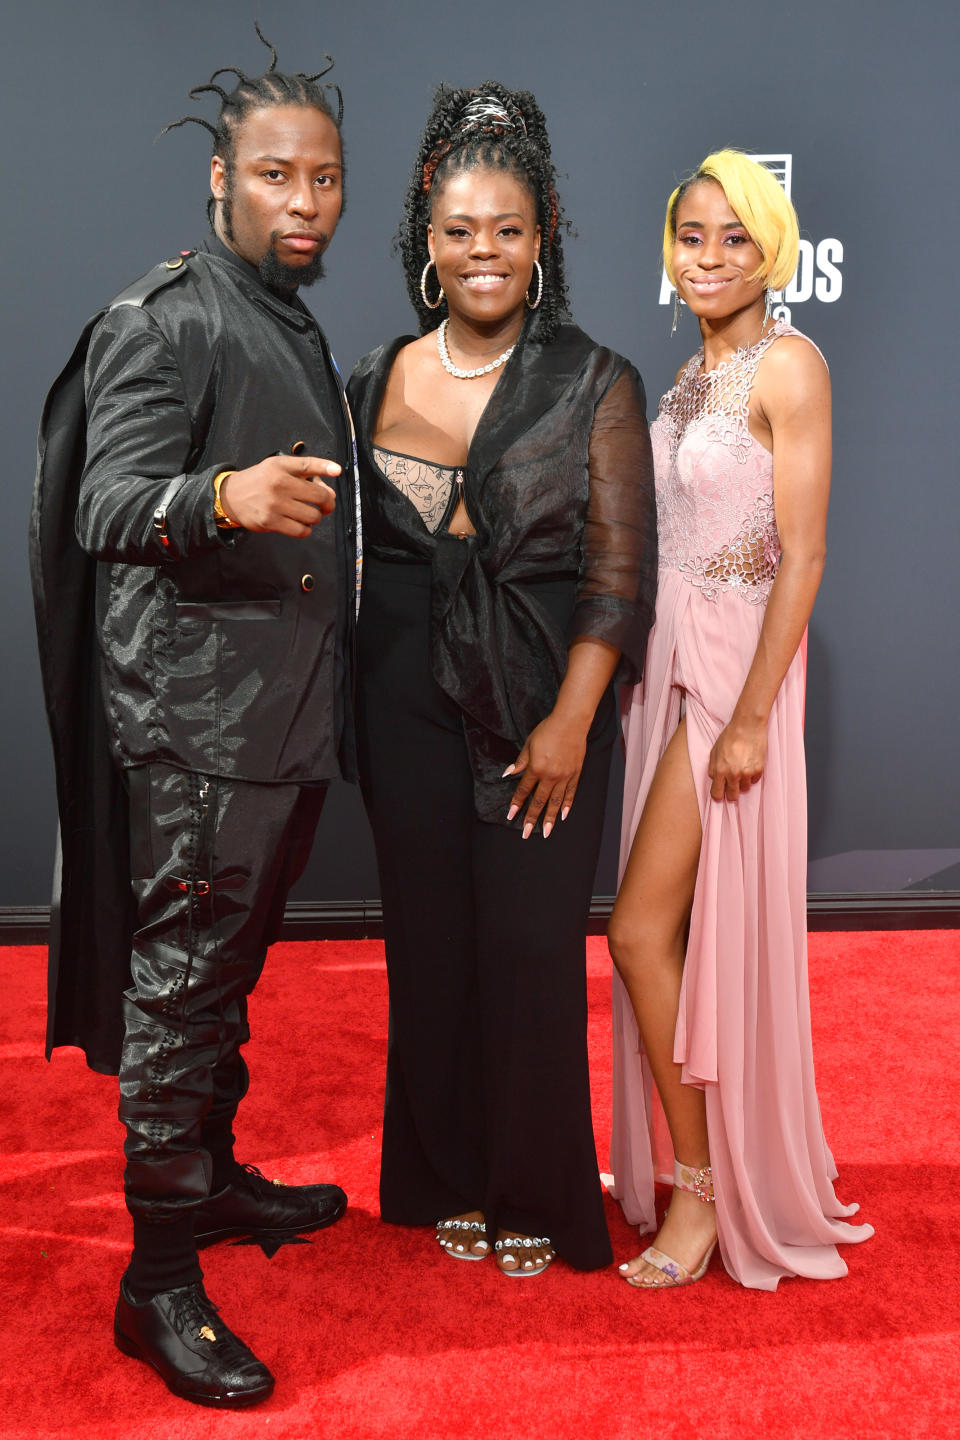 Young Dirty Bastard and guests attend the 2022 BET Awards at Microsoft Theater on June 26, 2022 in Los Angeles, California.